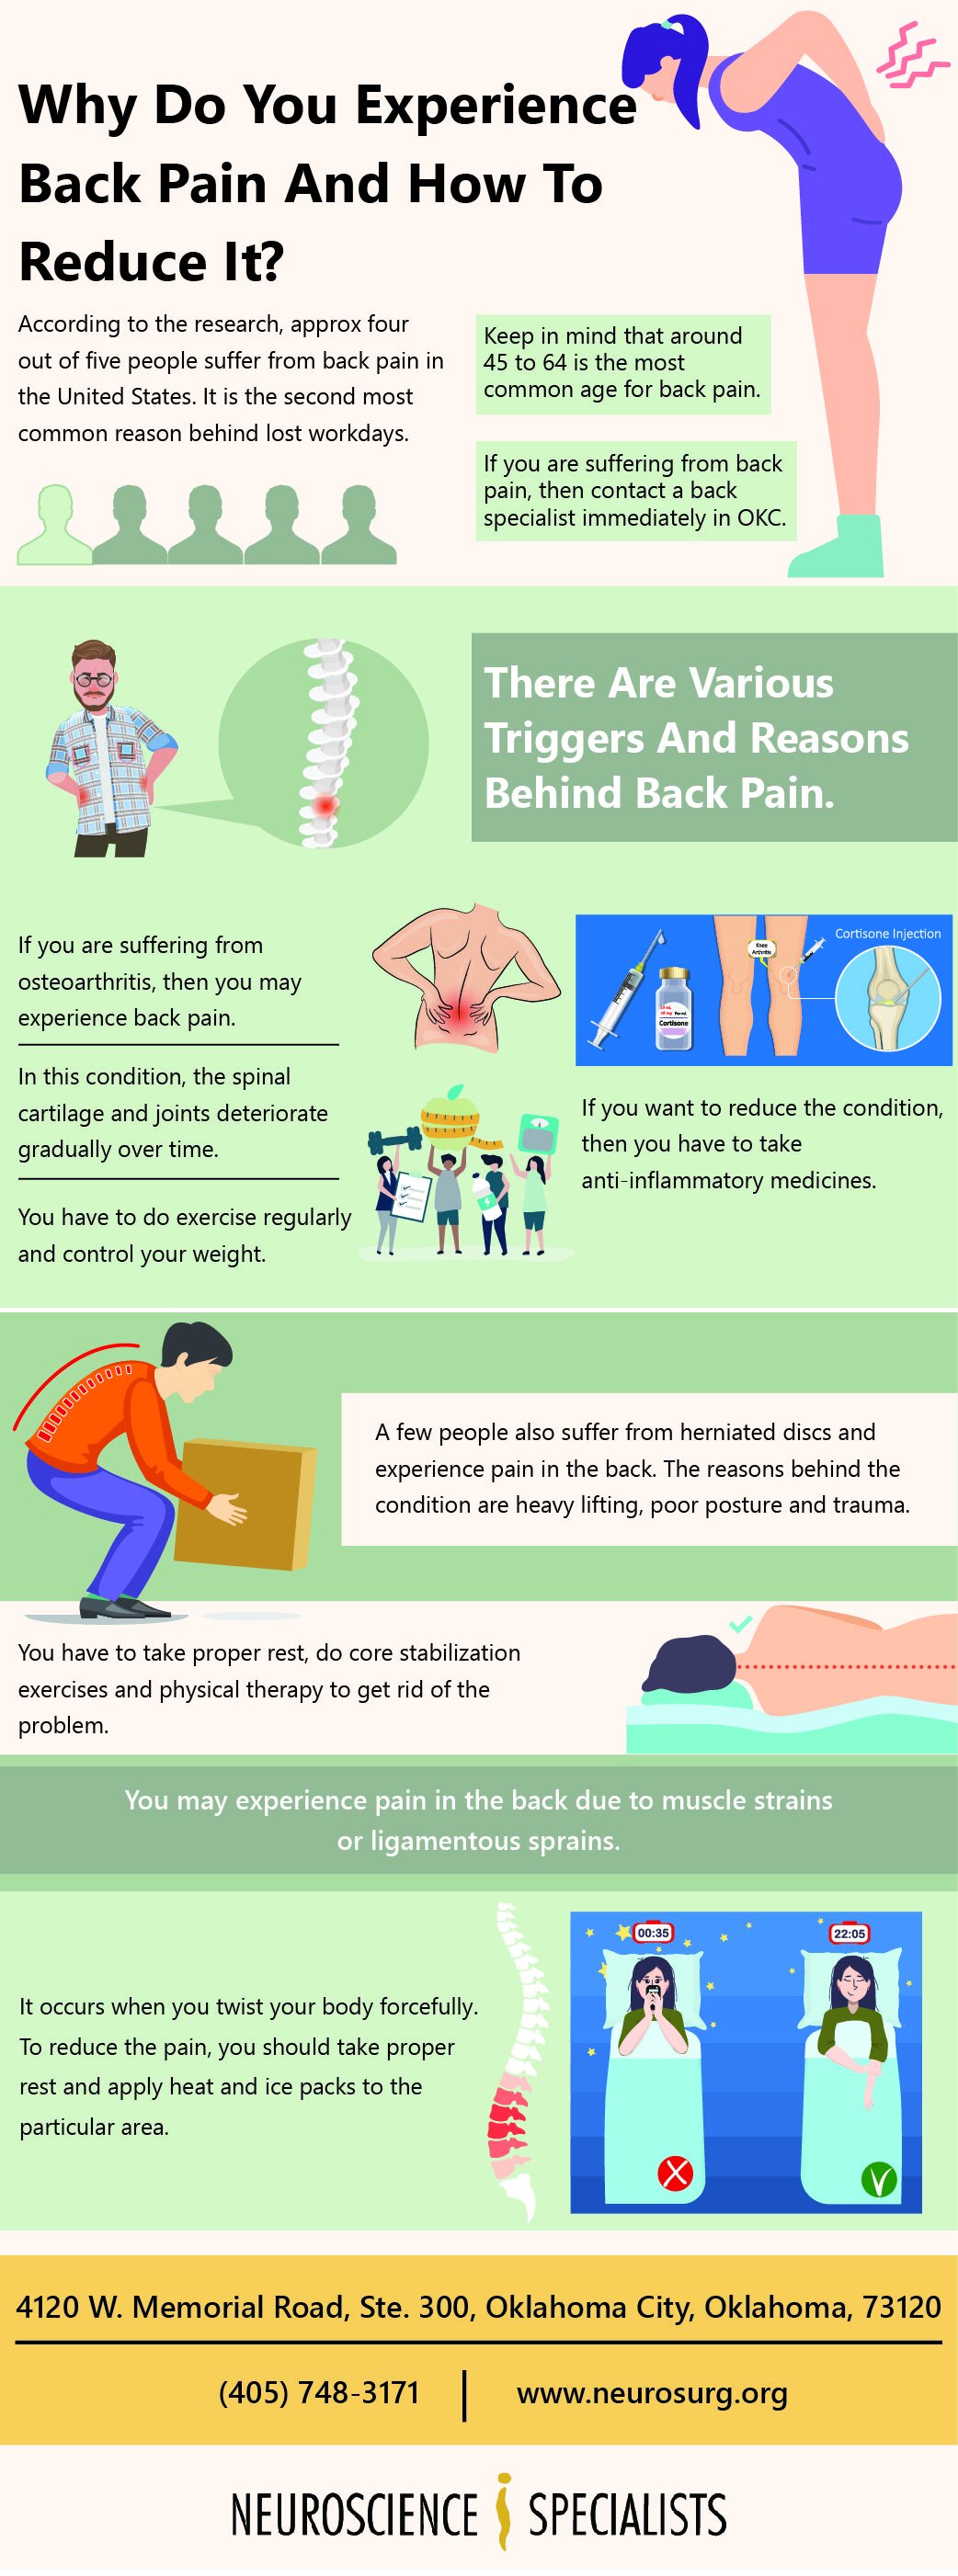 https://www.neurosurg.org/editor-uploads/website-2266/back-specialist-okc-why-do-you-experience-back-pain-and-how-to-reduce-it-infographic-neuroscience-1643102705.jpg